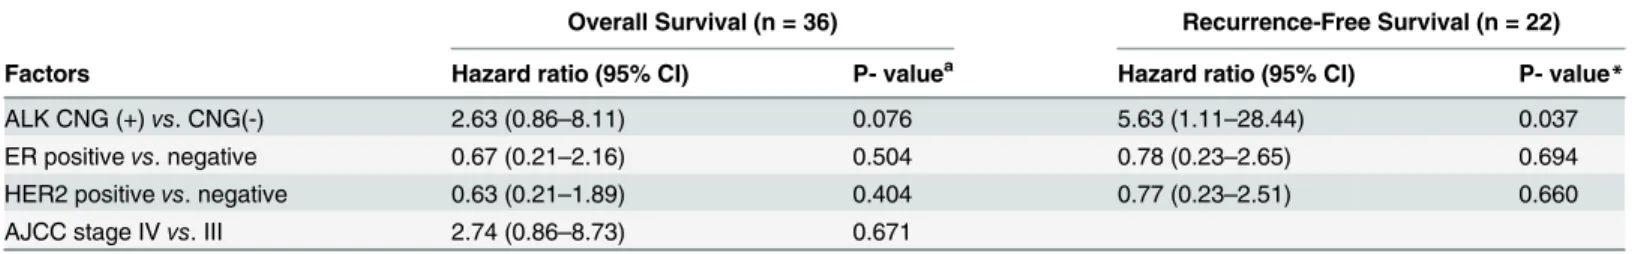 Table 3. Analyses of Prognostic Factors for Overall Survival and Recurrence-free Survival